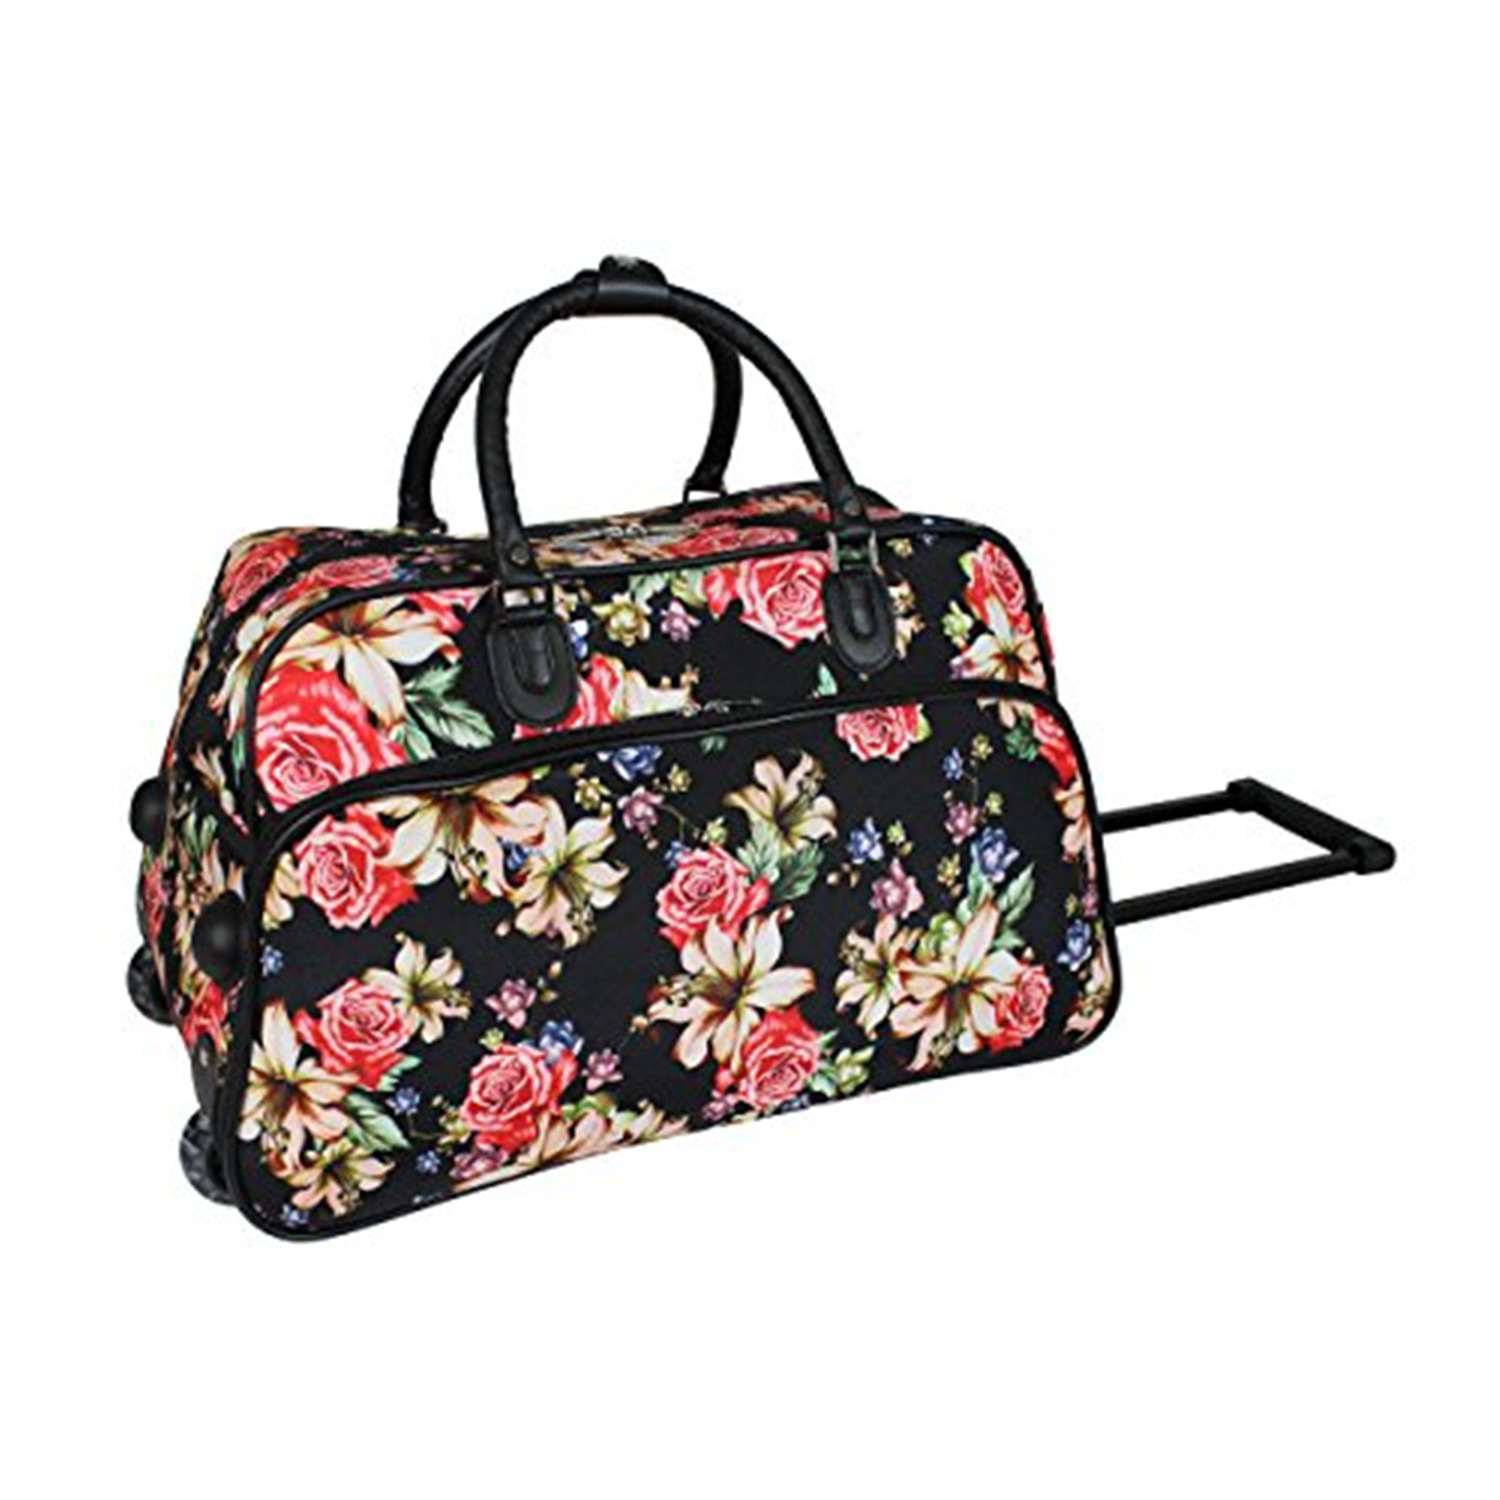 World Traveler 21-Inch Carry-On Rolling Duffel Bag - Rose Lily - image 1 of 4